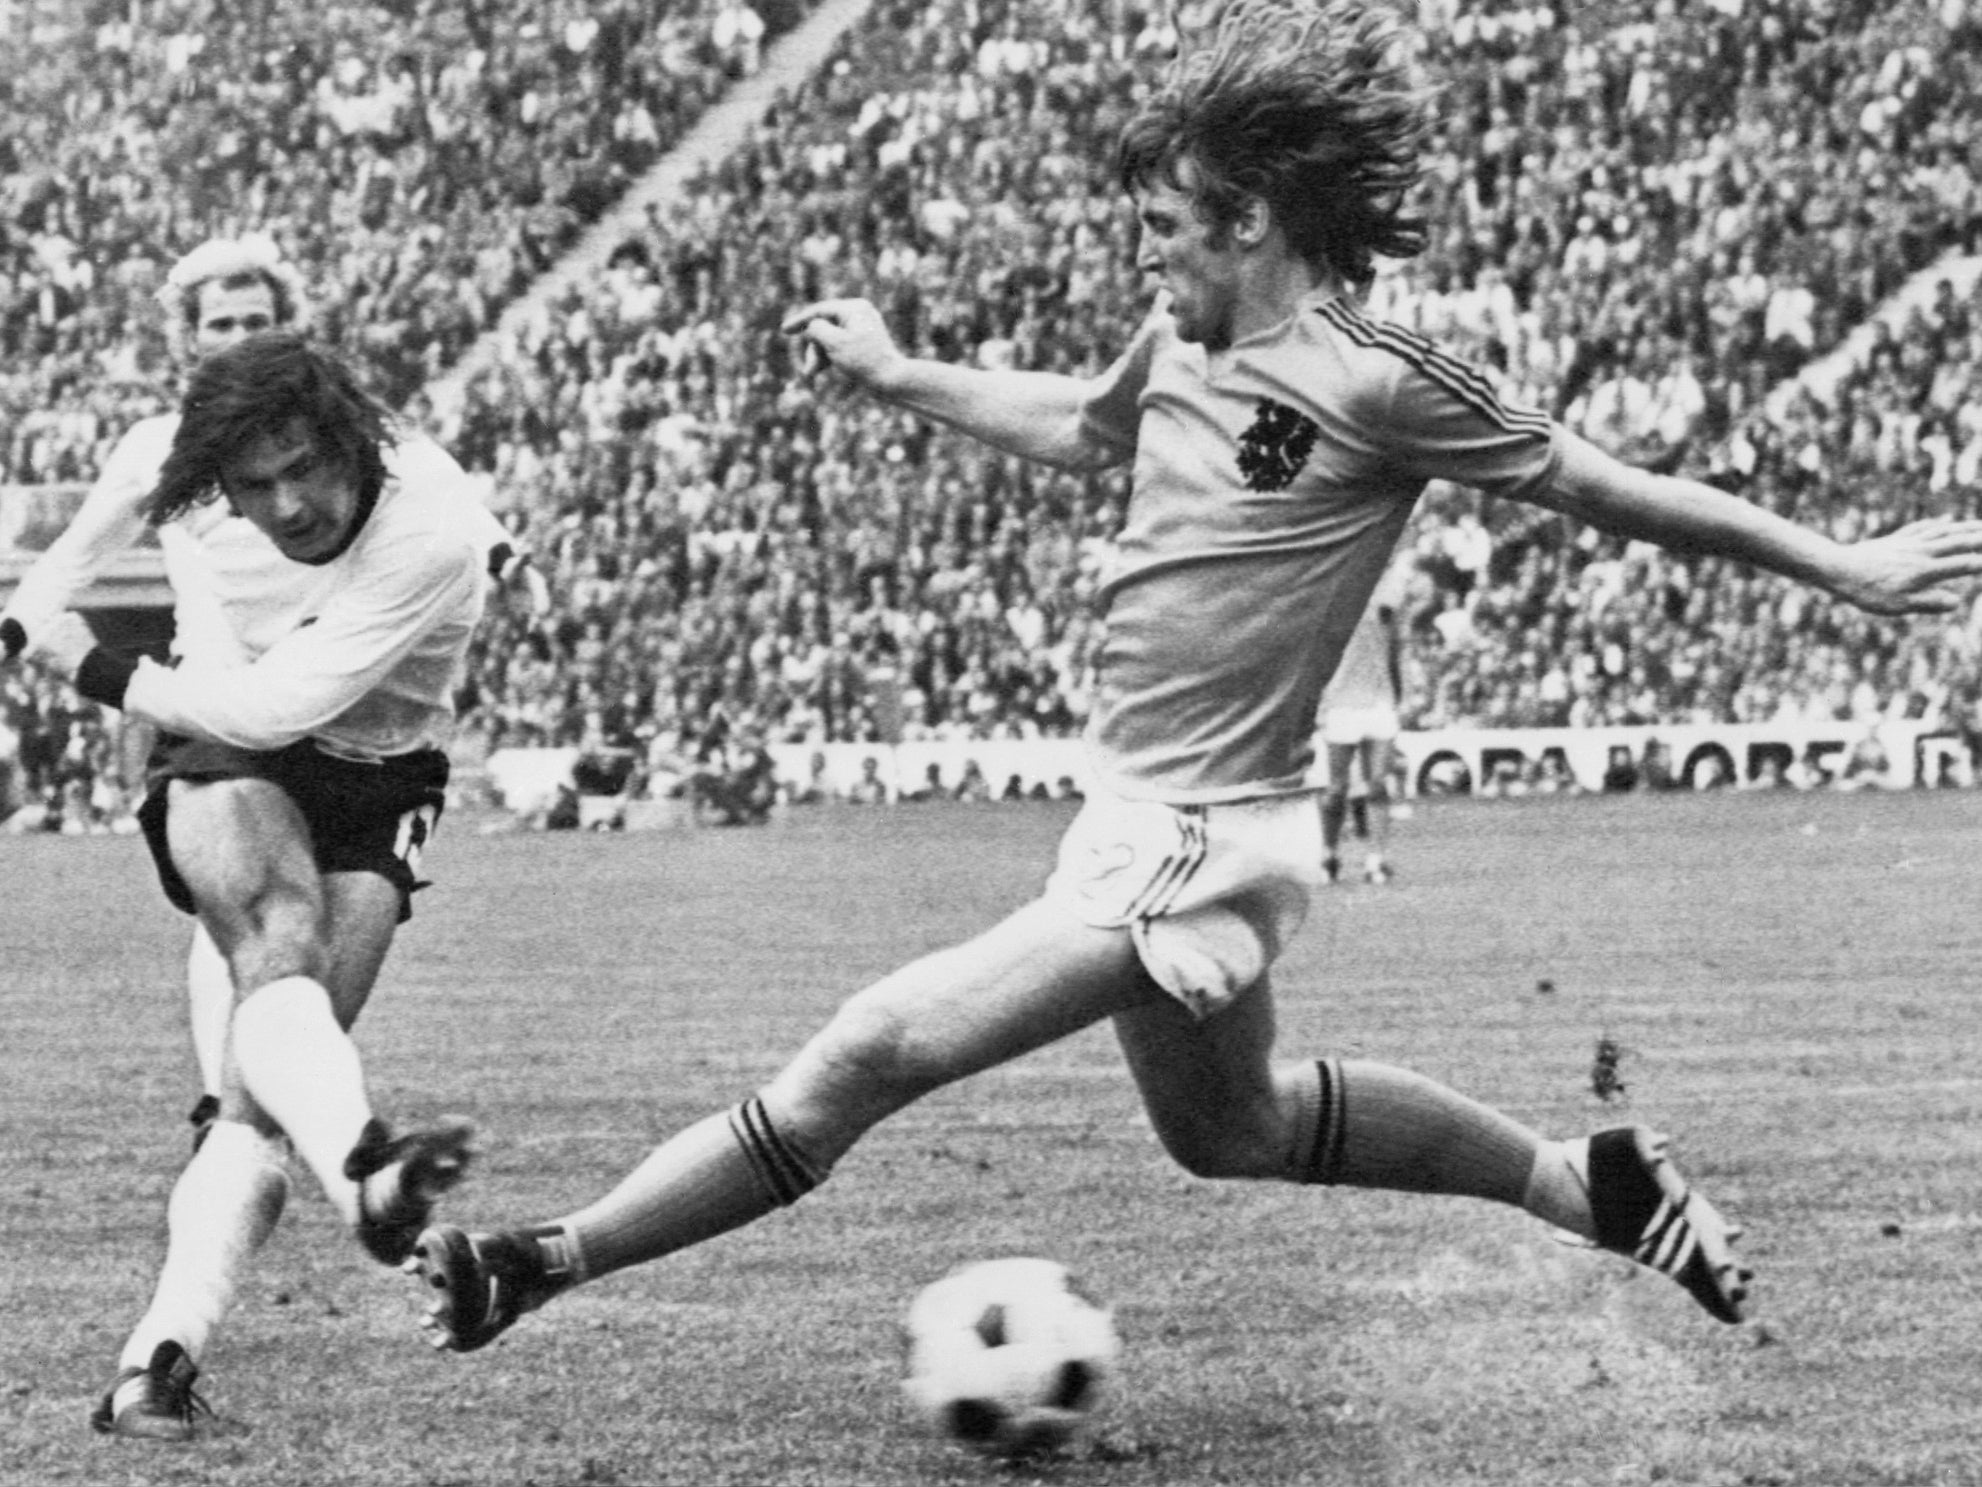 Muller shoots through the legs of the Netherlands’ Rudi Krol to make it 2-1 in the 1974 final in Munich